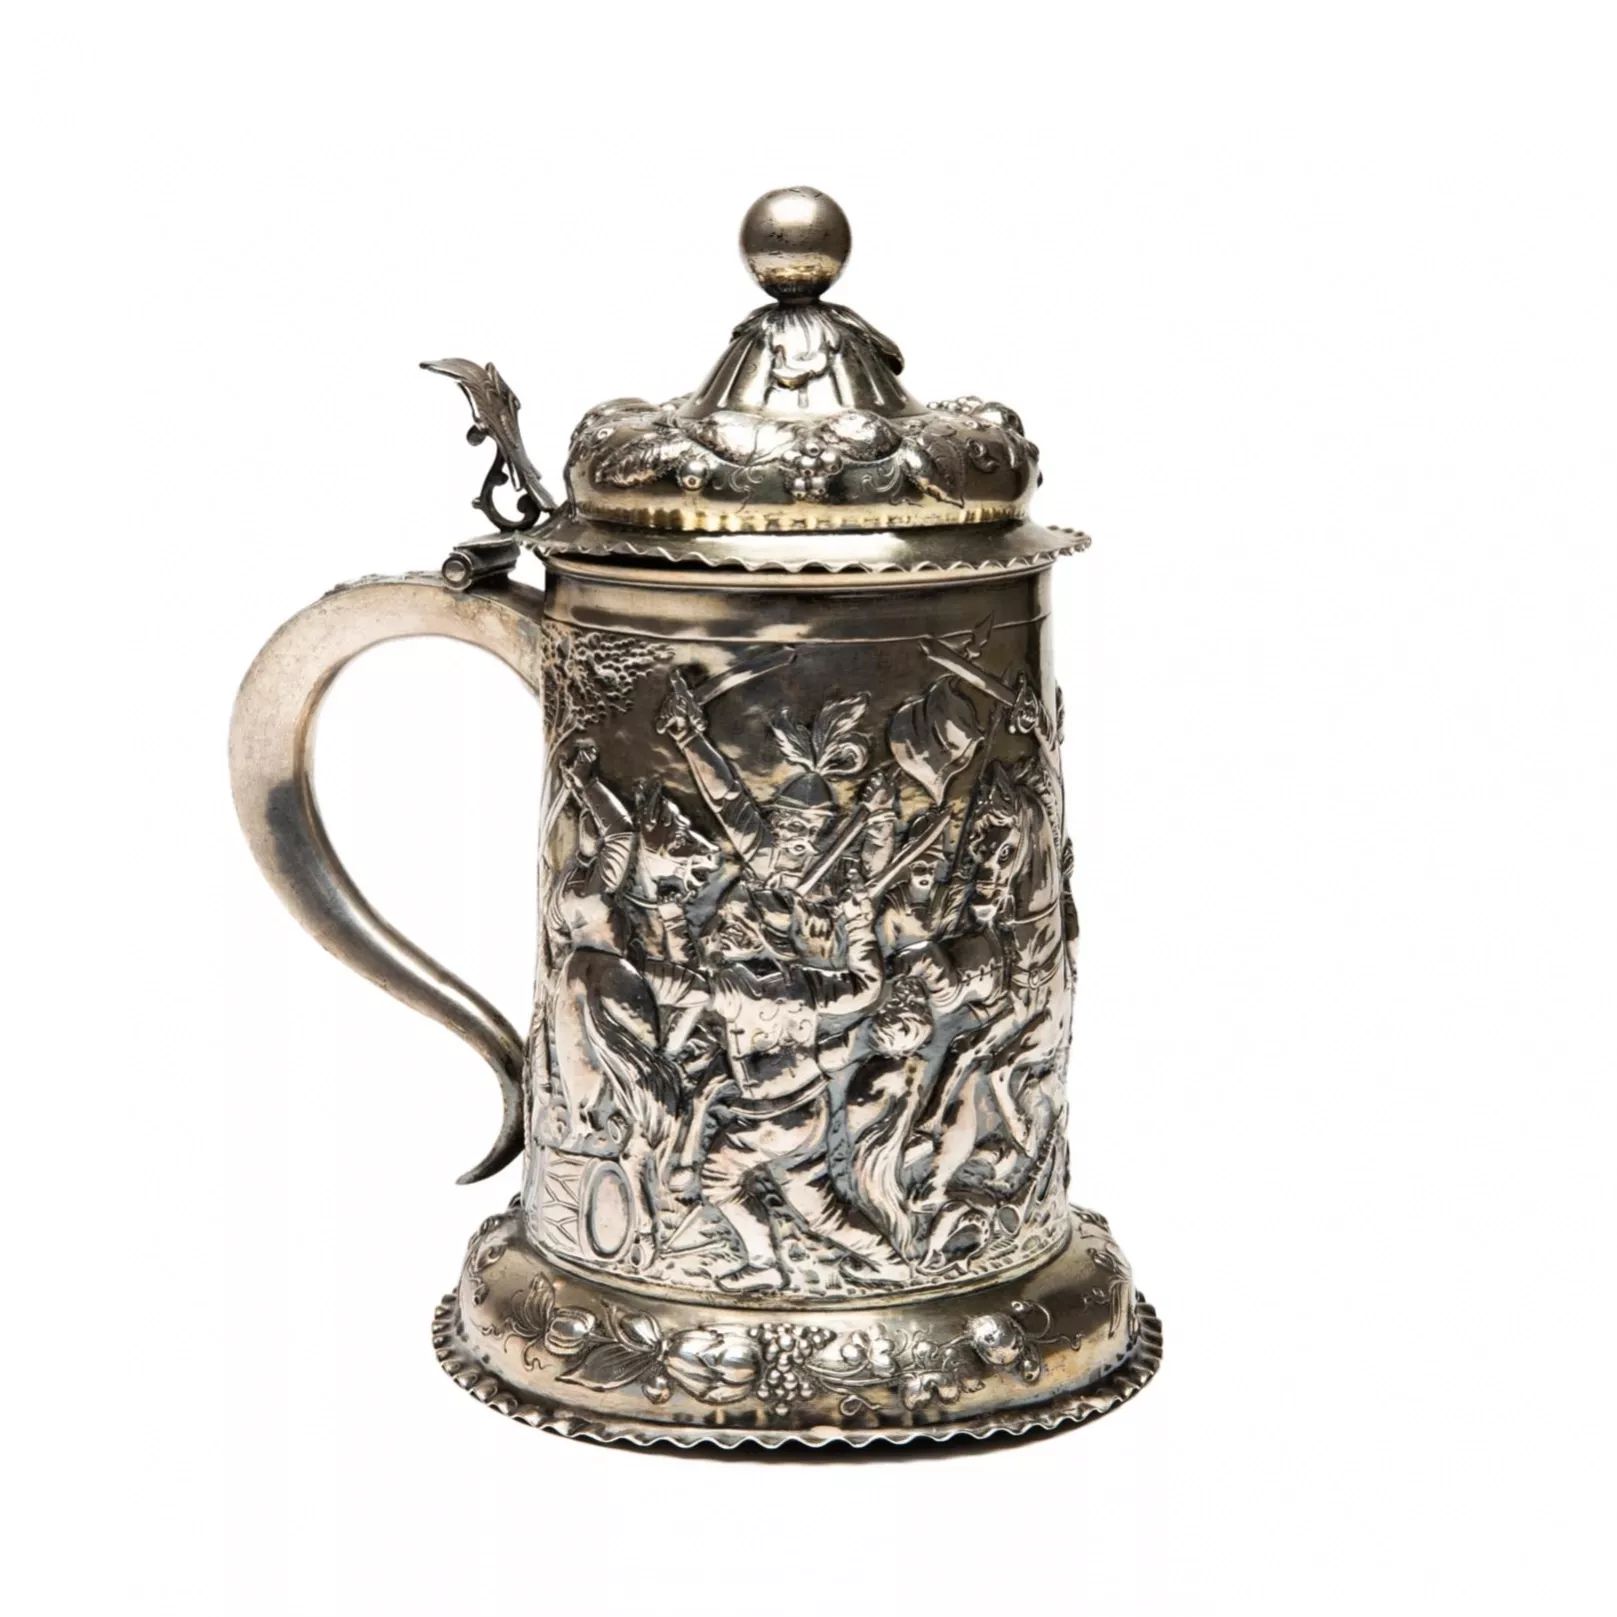 Silver-beer-goblet-with-battle-scenes-First-half-of-the-19th-century